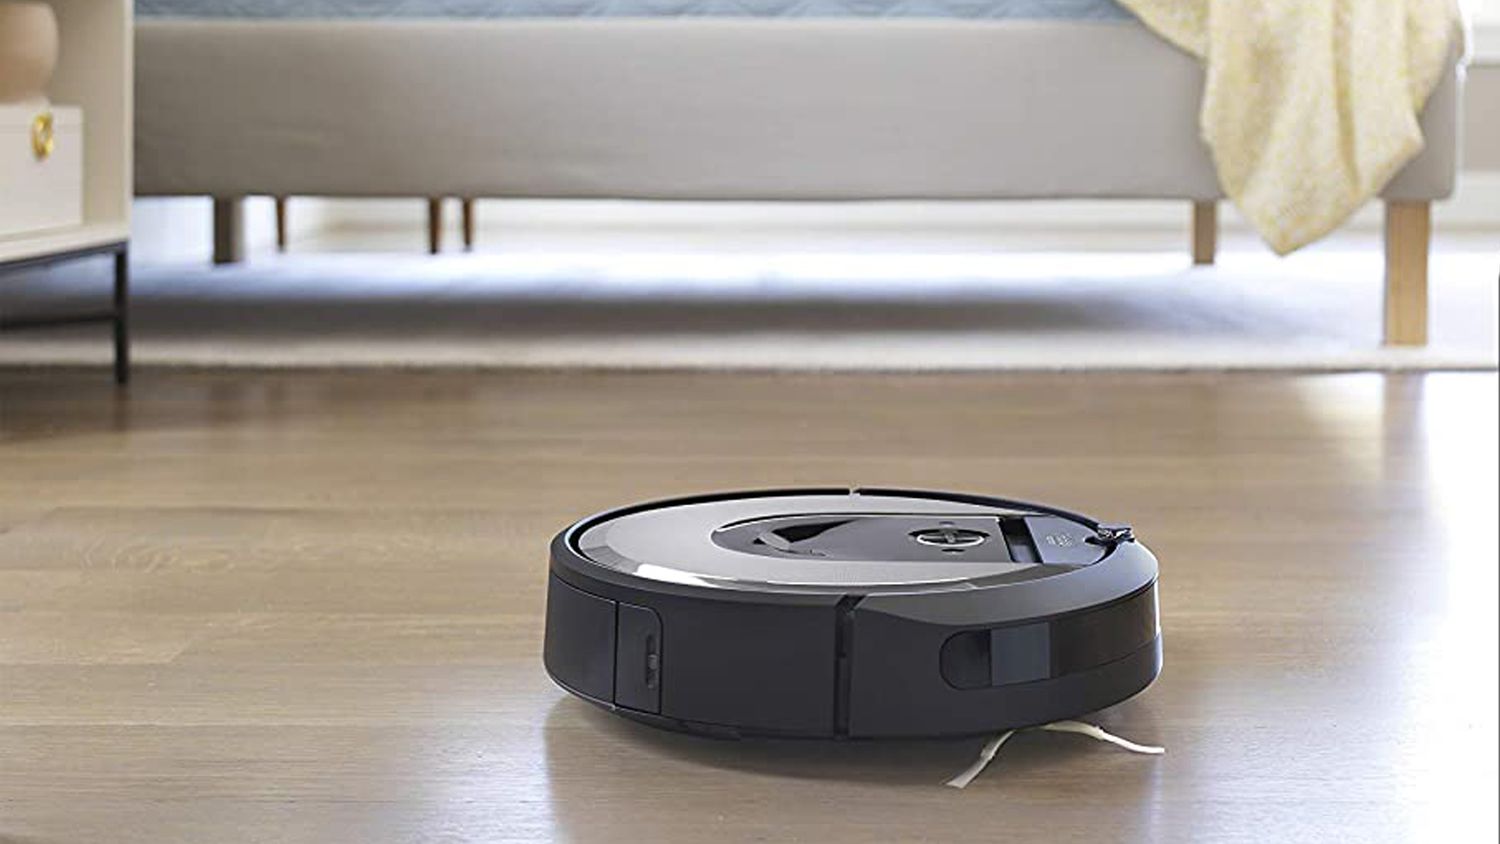 Best Robot Vacuums For Hardwood Floors, What Vacuum Works Best On Hardwood Floors